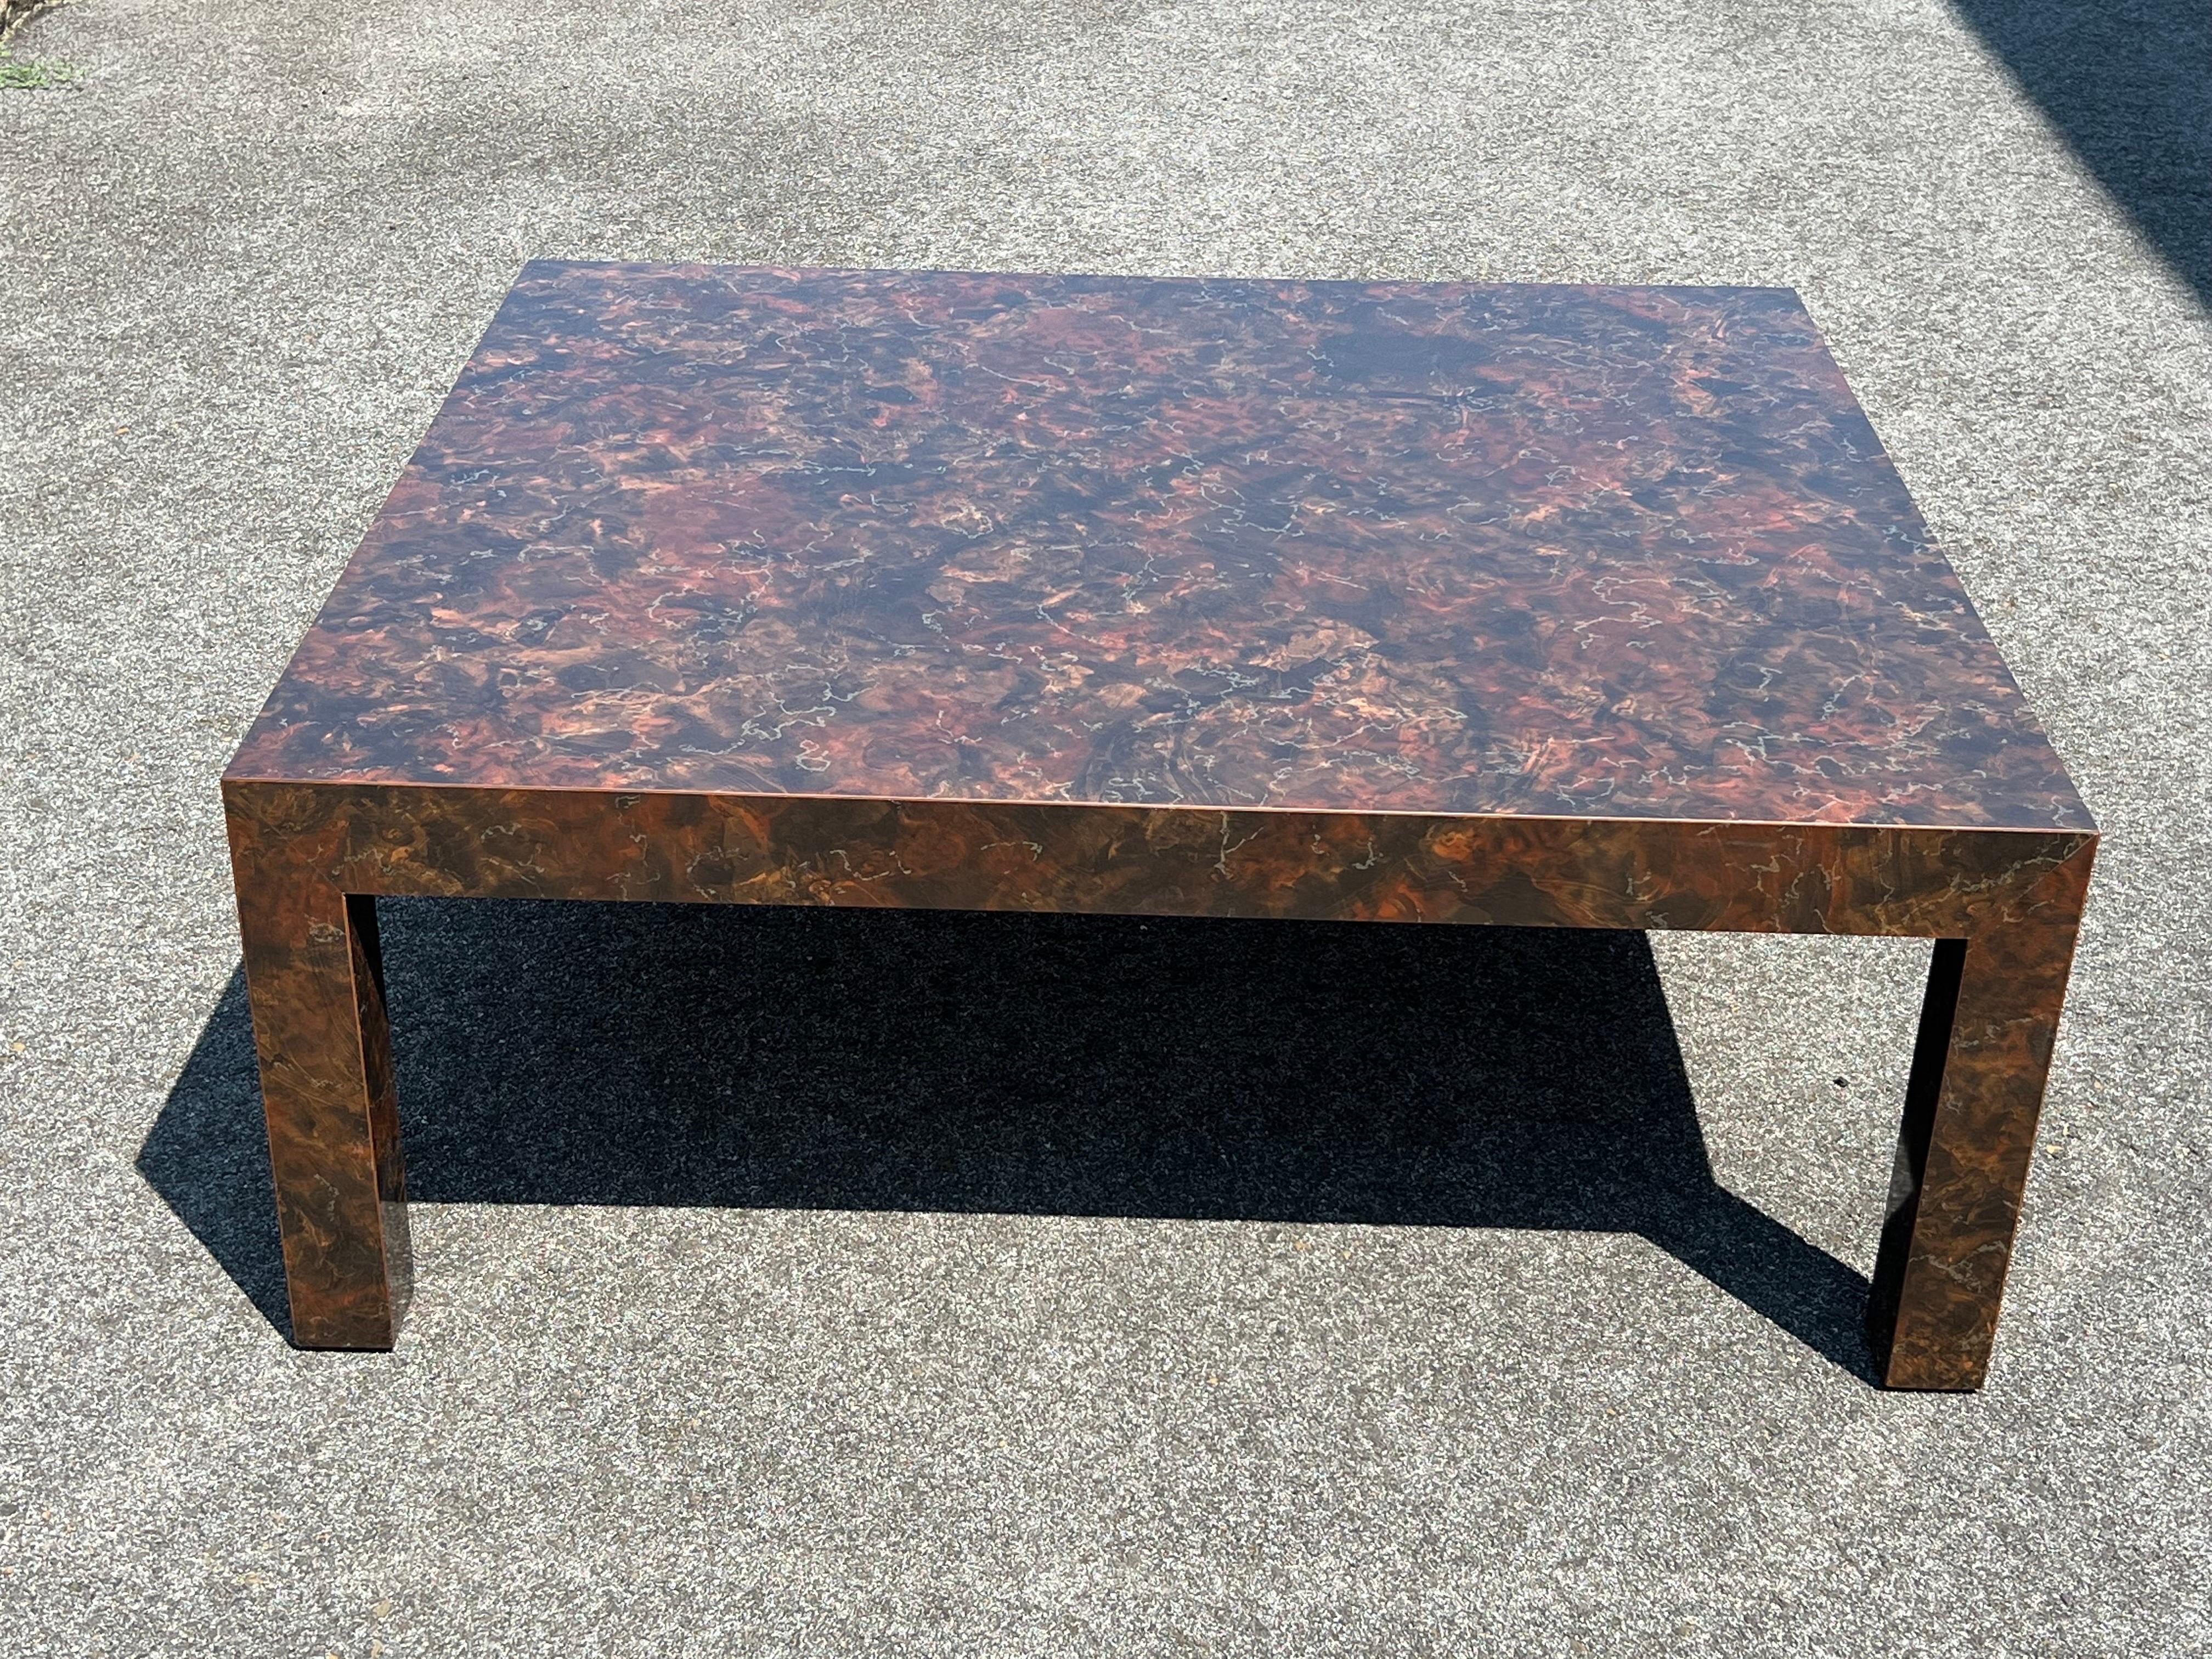 Post Modern Laminated Tortoiseshell Coffee Table. Mid Century Post Modern Laminate Tortoiseshell End Table. Square table with earth tones of brown, gold and orange. Nice oversized size for a large space. Matching sofa table, and two end tables are